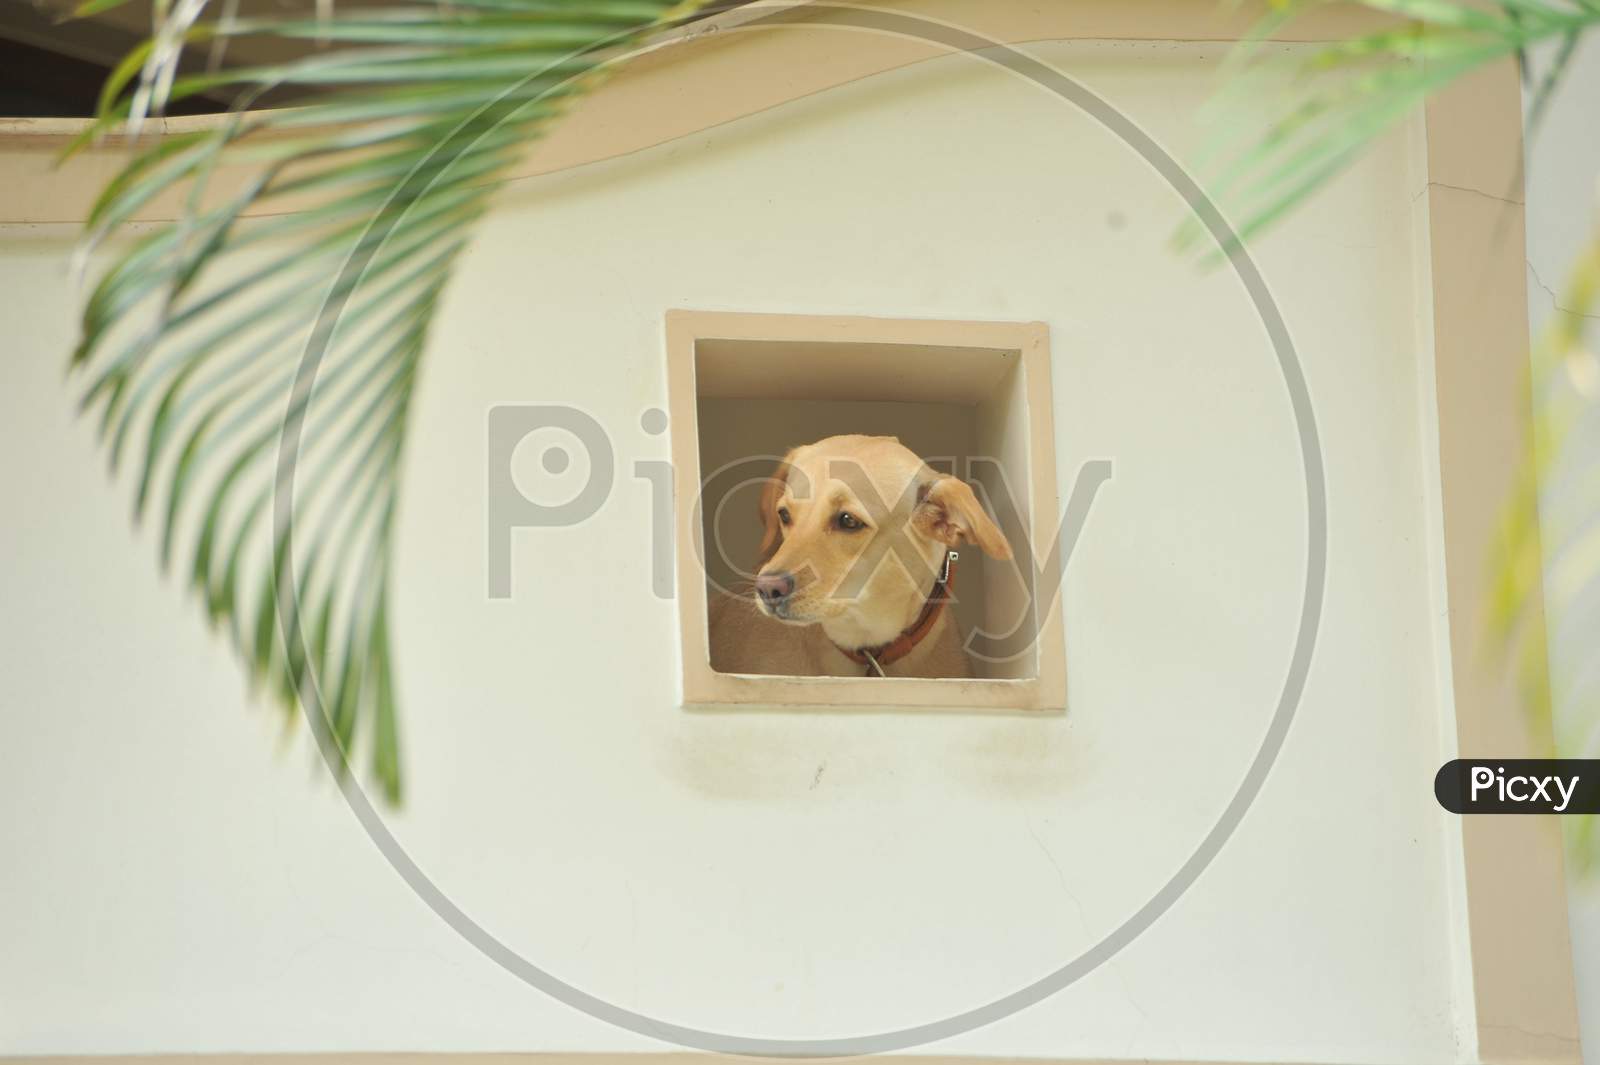 Dog Looking Out From a Hole